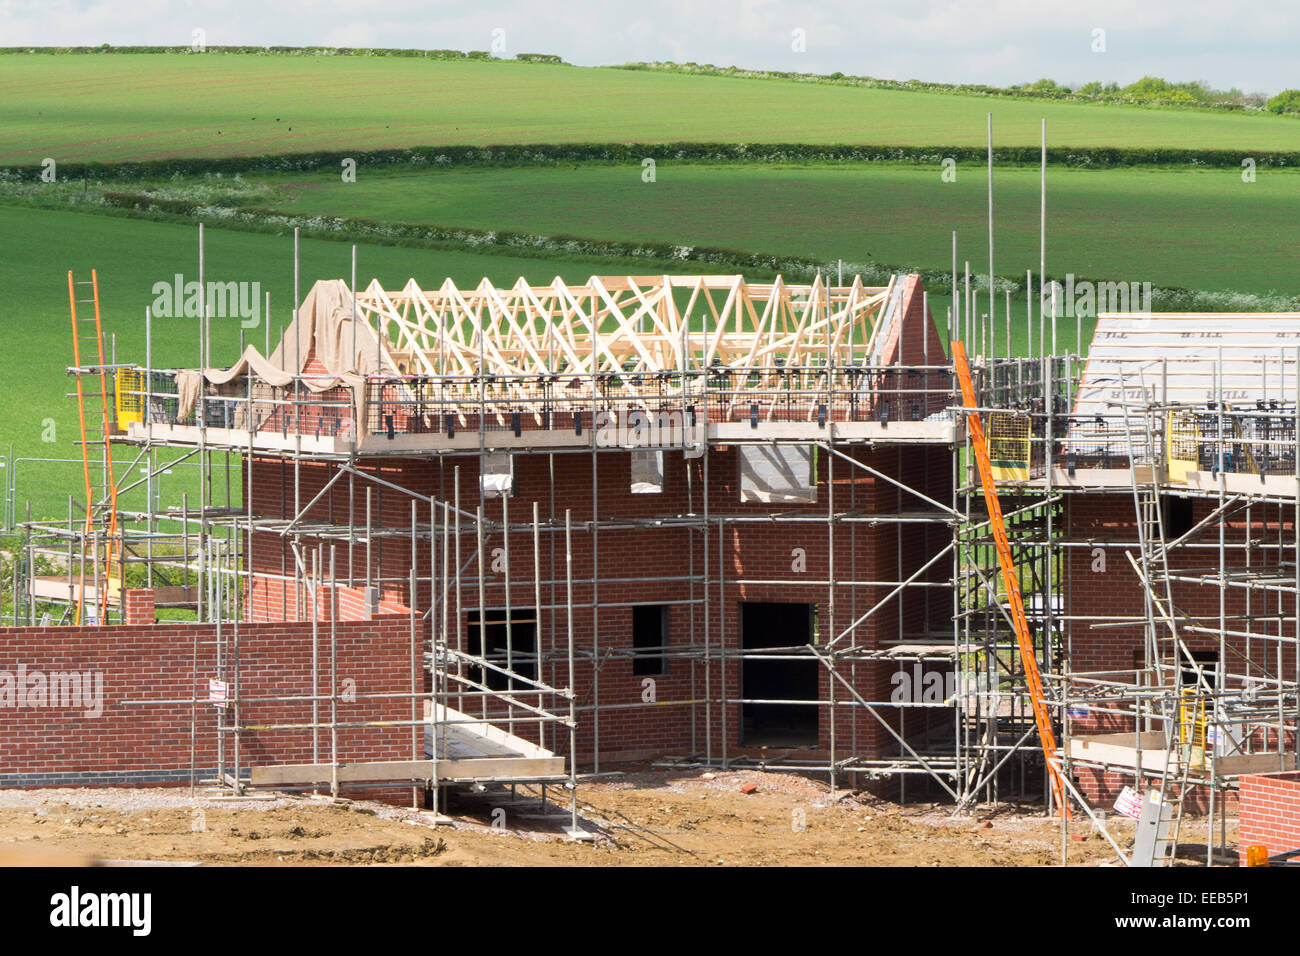 Construction of 4 Bedroom House, Grantham, Lincolnshire Stock Photo